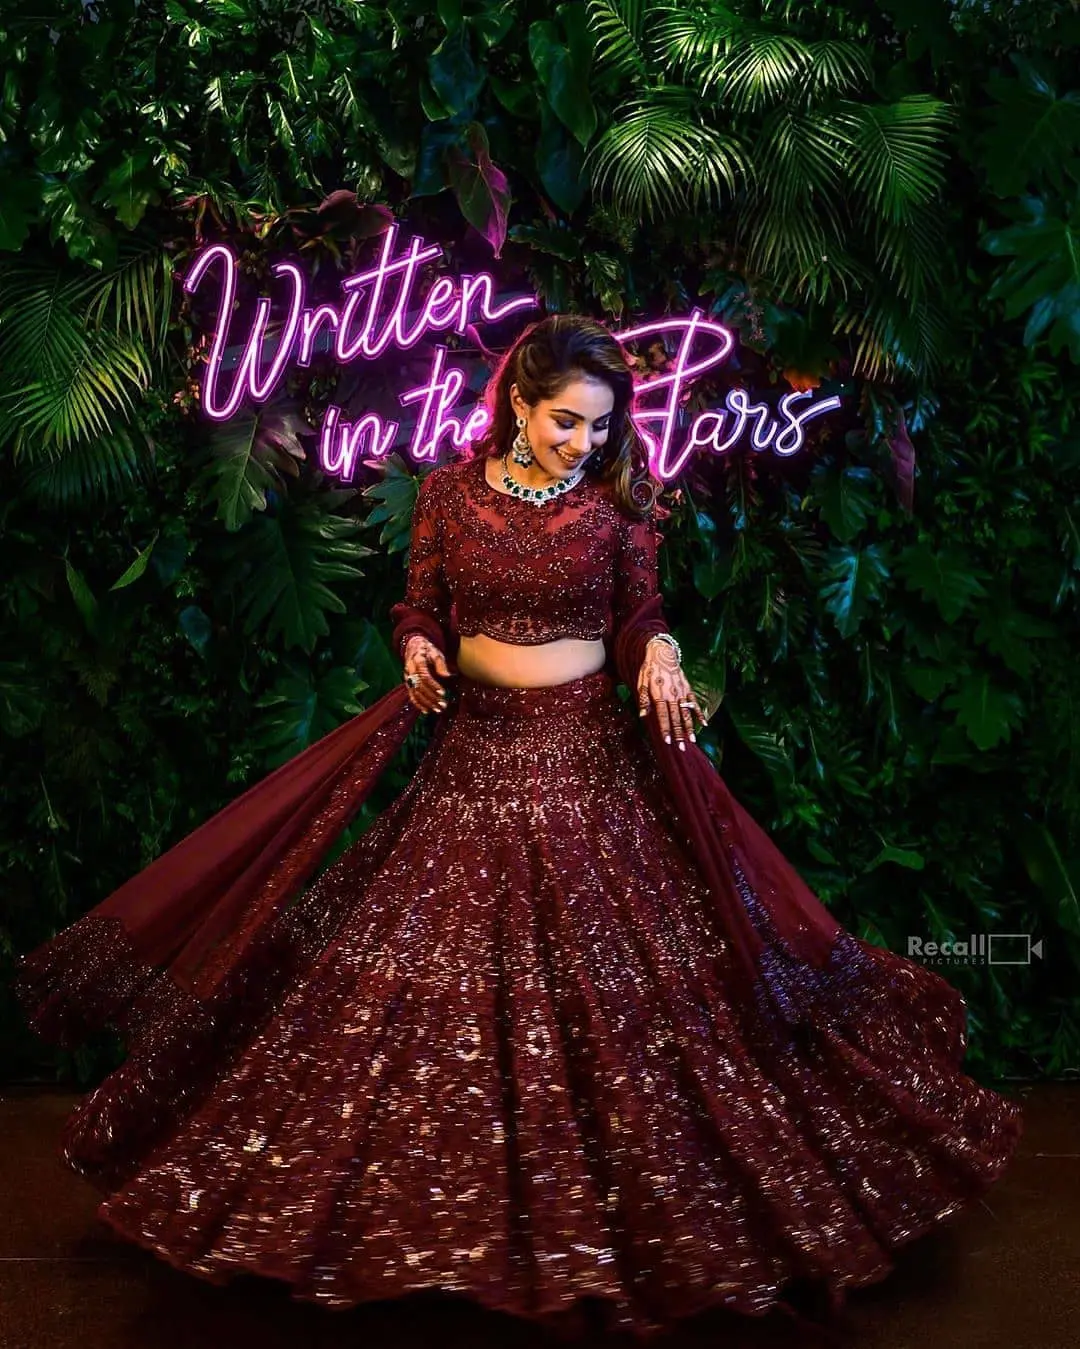 Glittery Sequin And Shimmer Lehengas Are Ruling 2022!